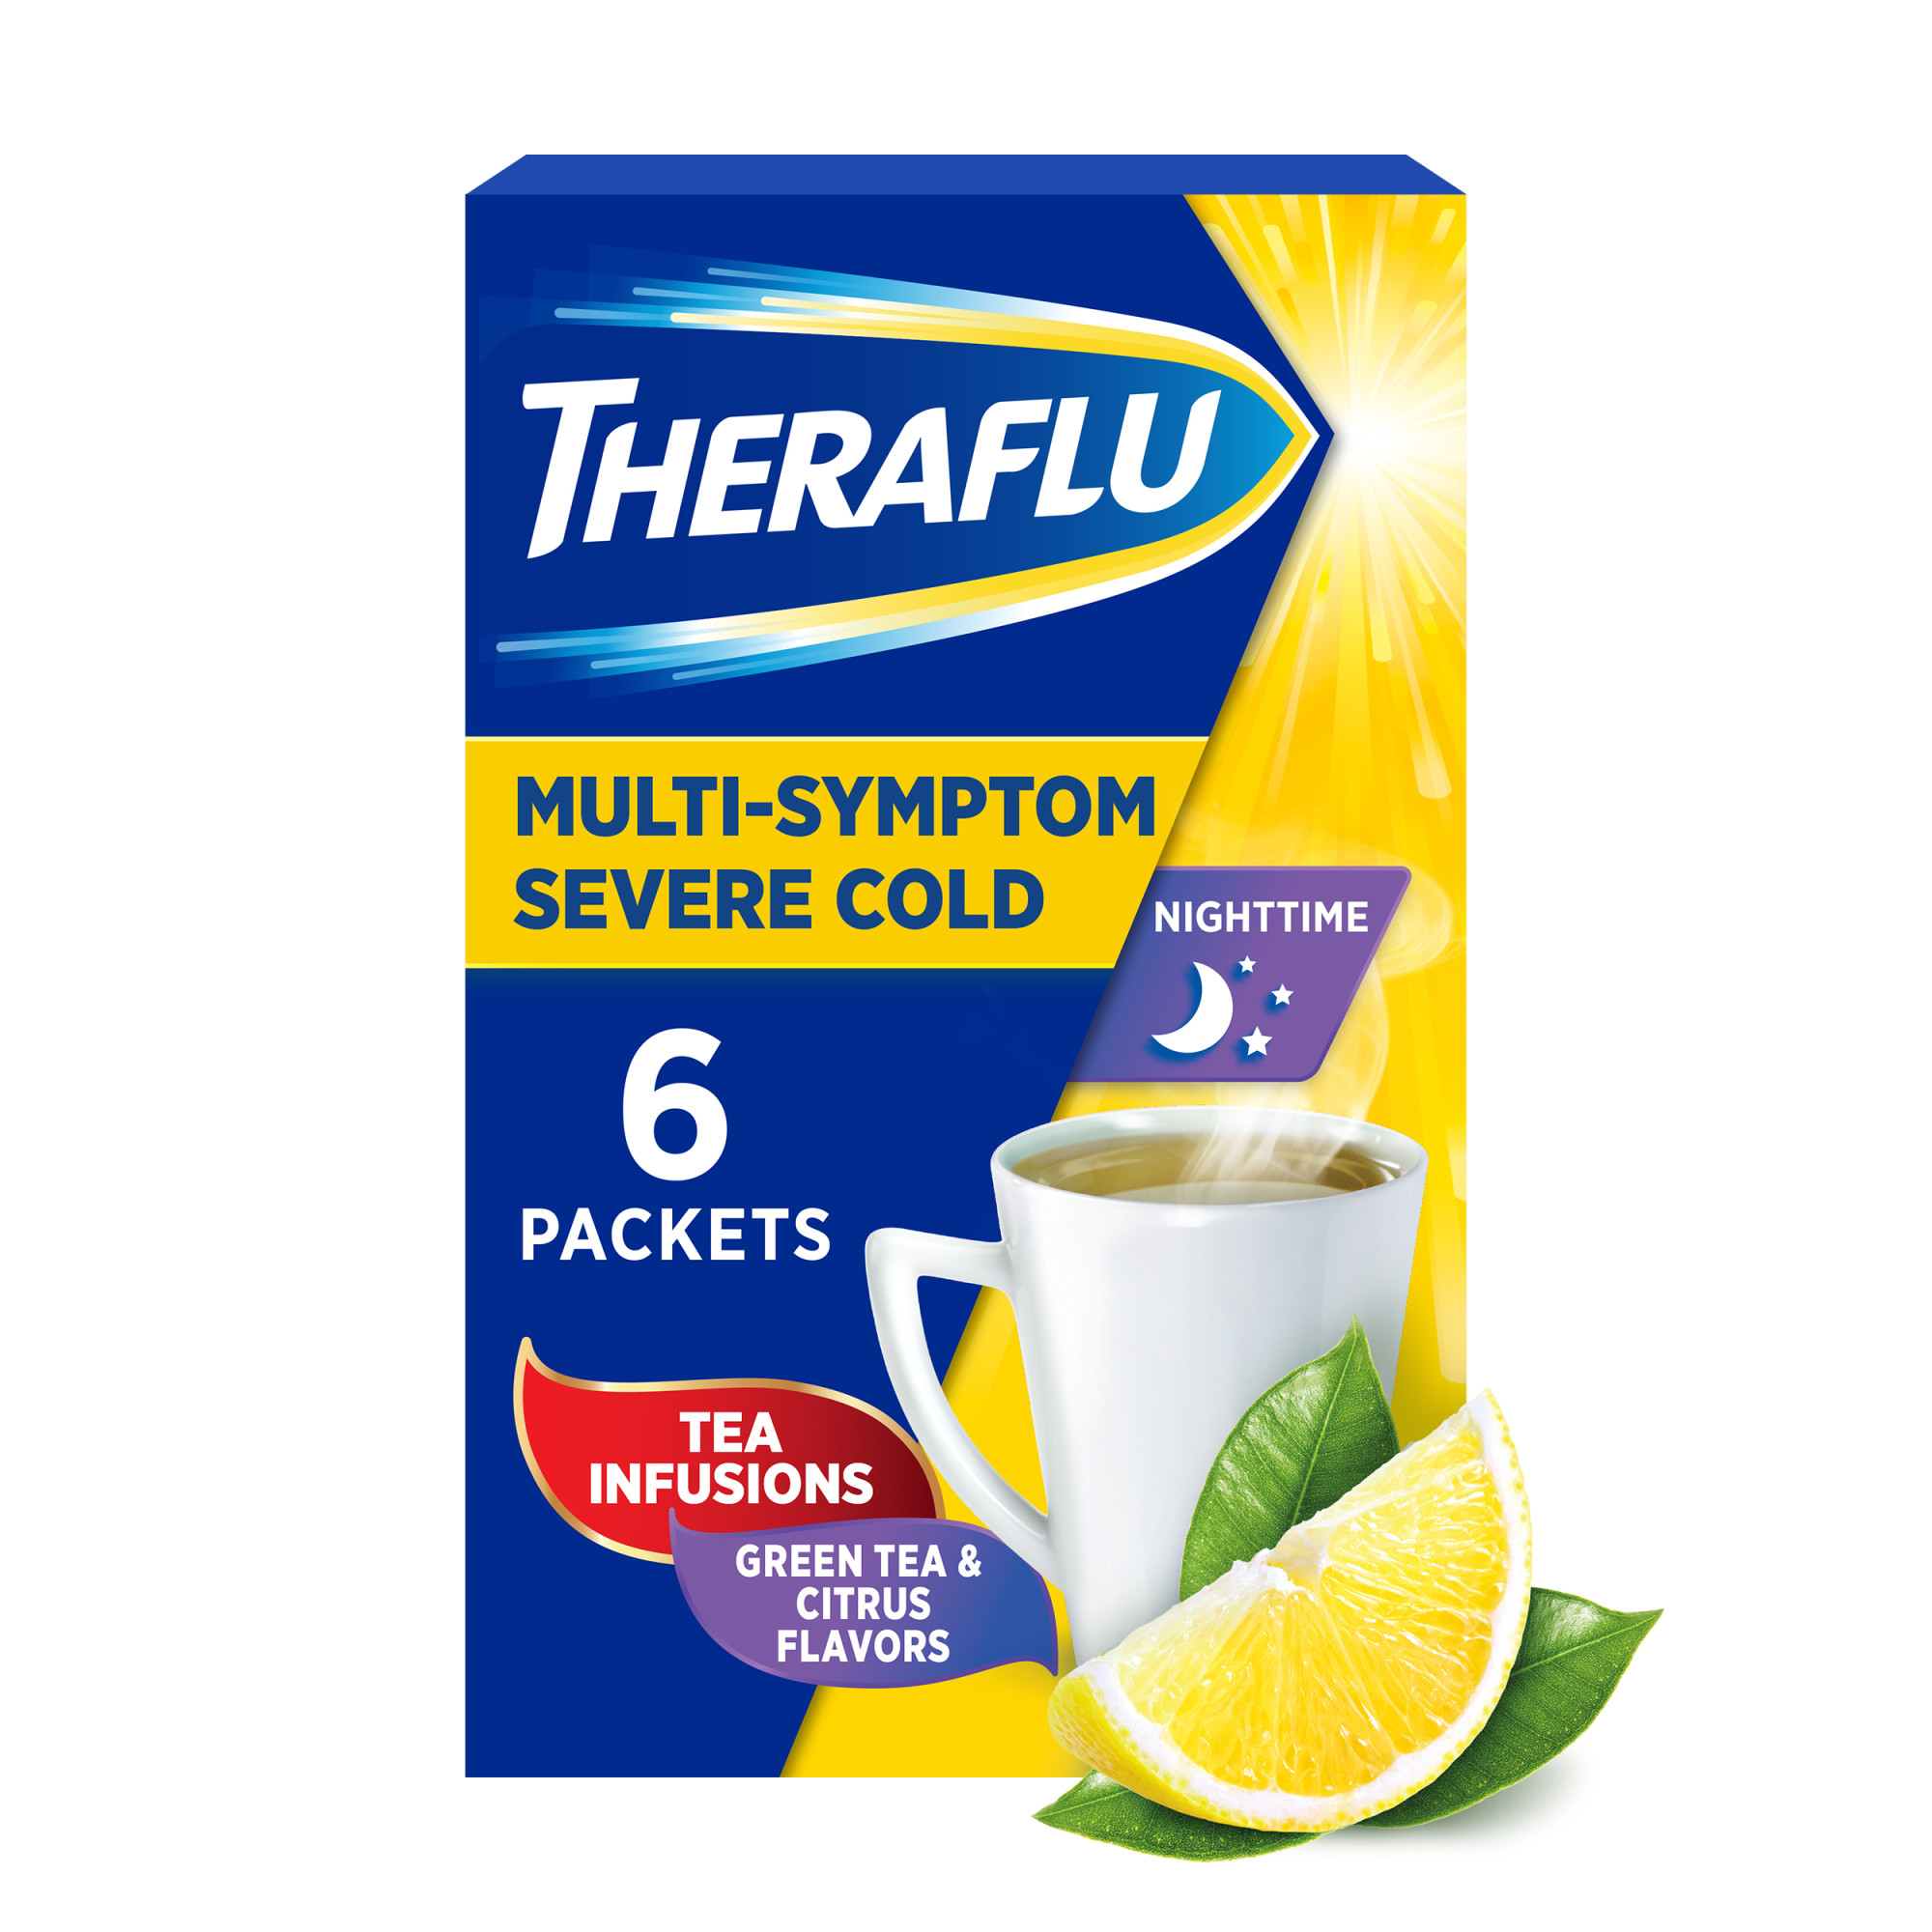 Theraflu Severe Cough Cold and Flu Nighttime Relief Medicine Powder, Green Tea and Citrus, 6 Count - image 1 of 10